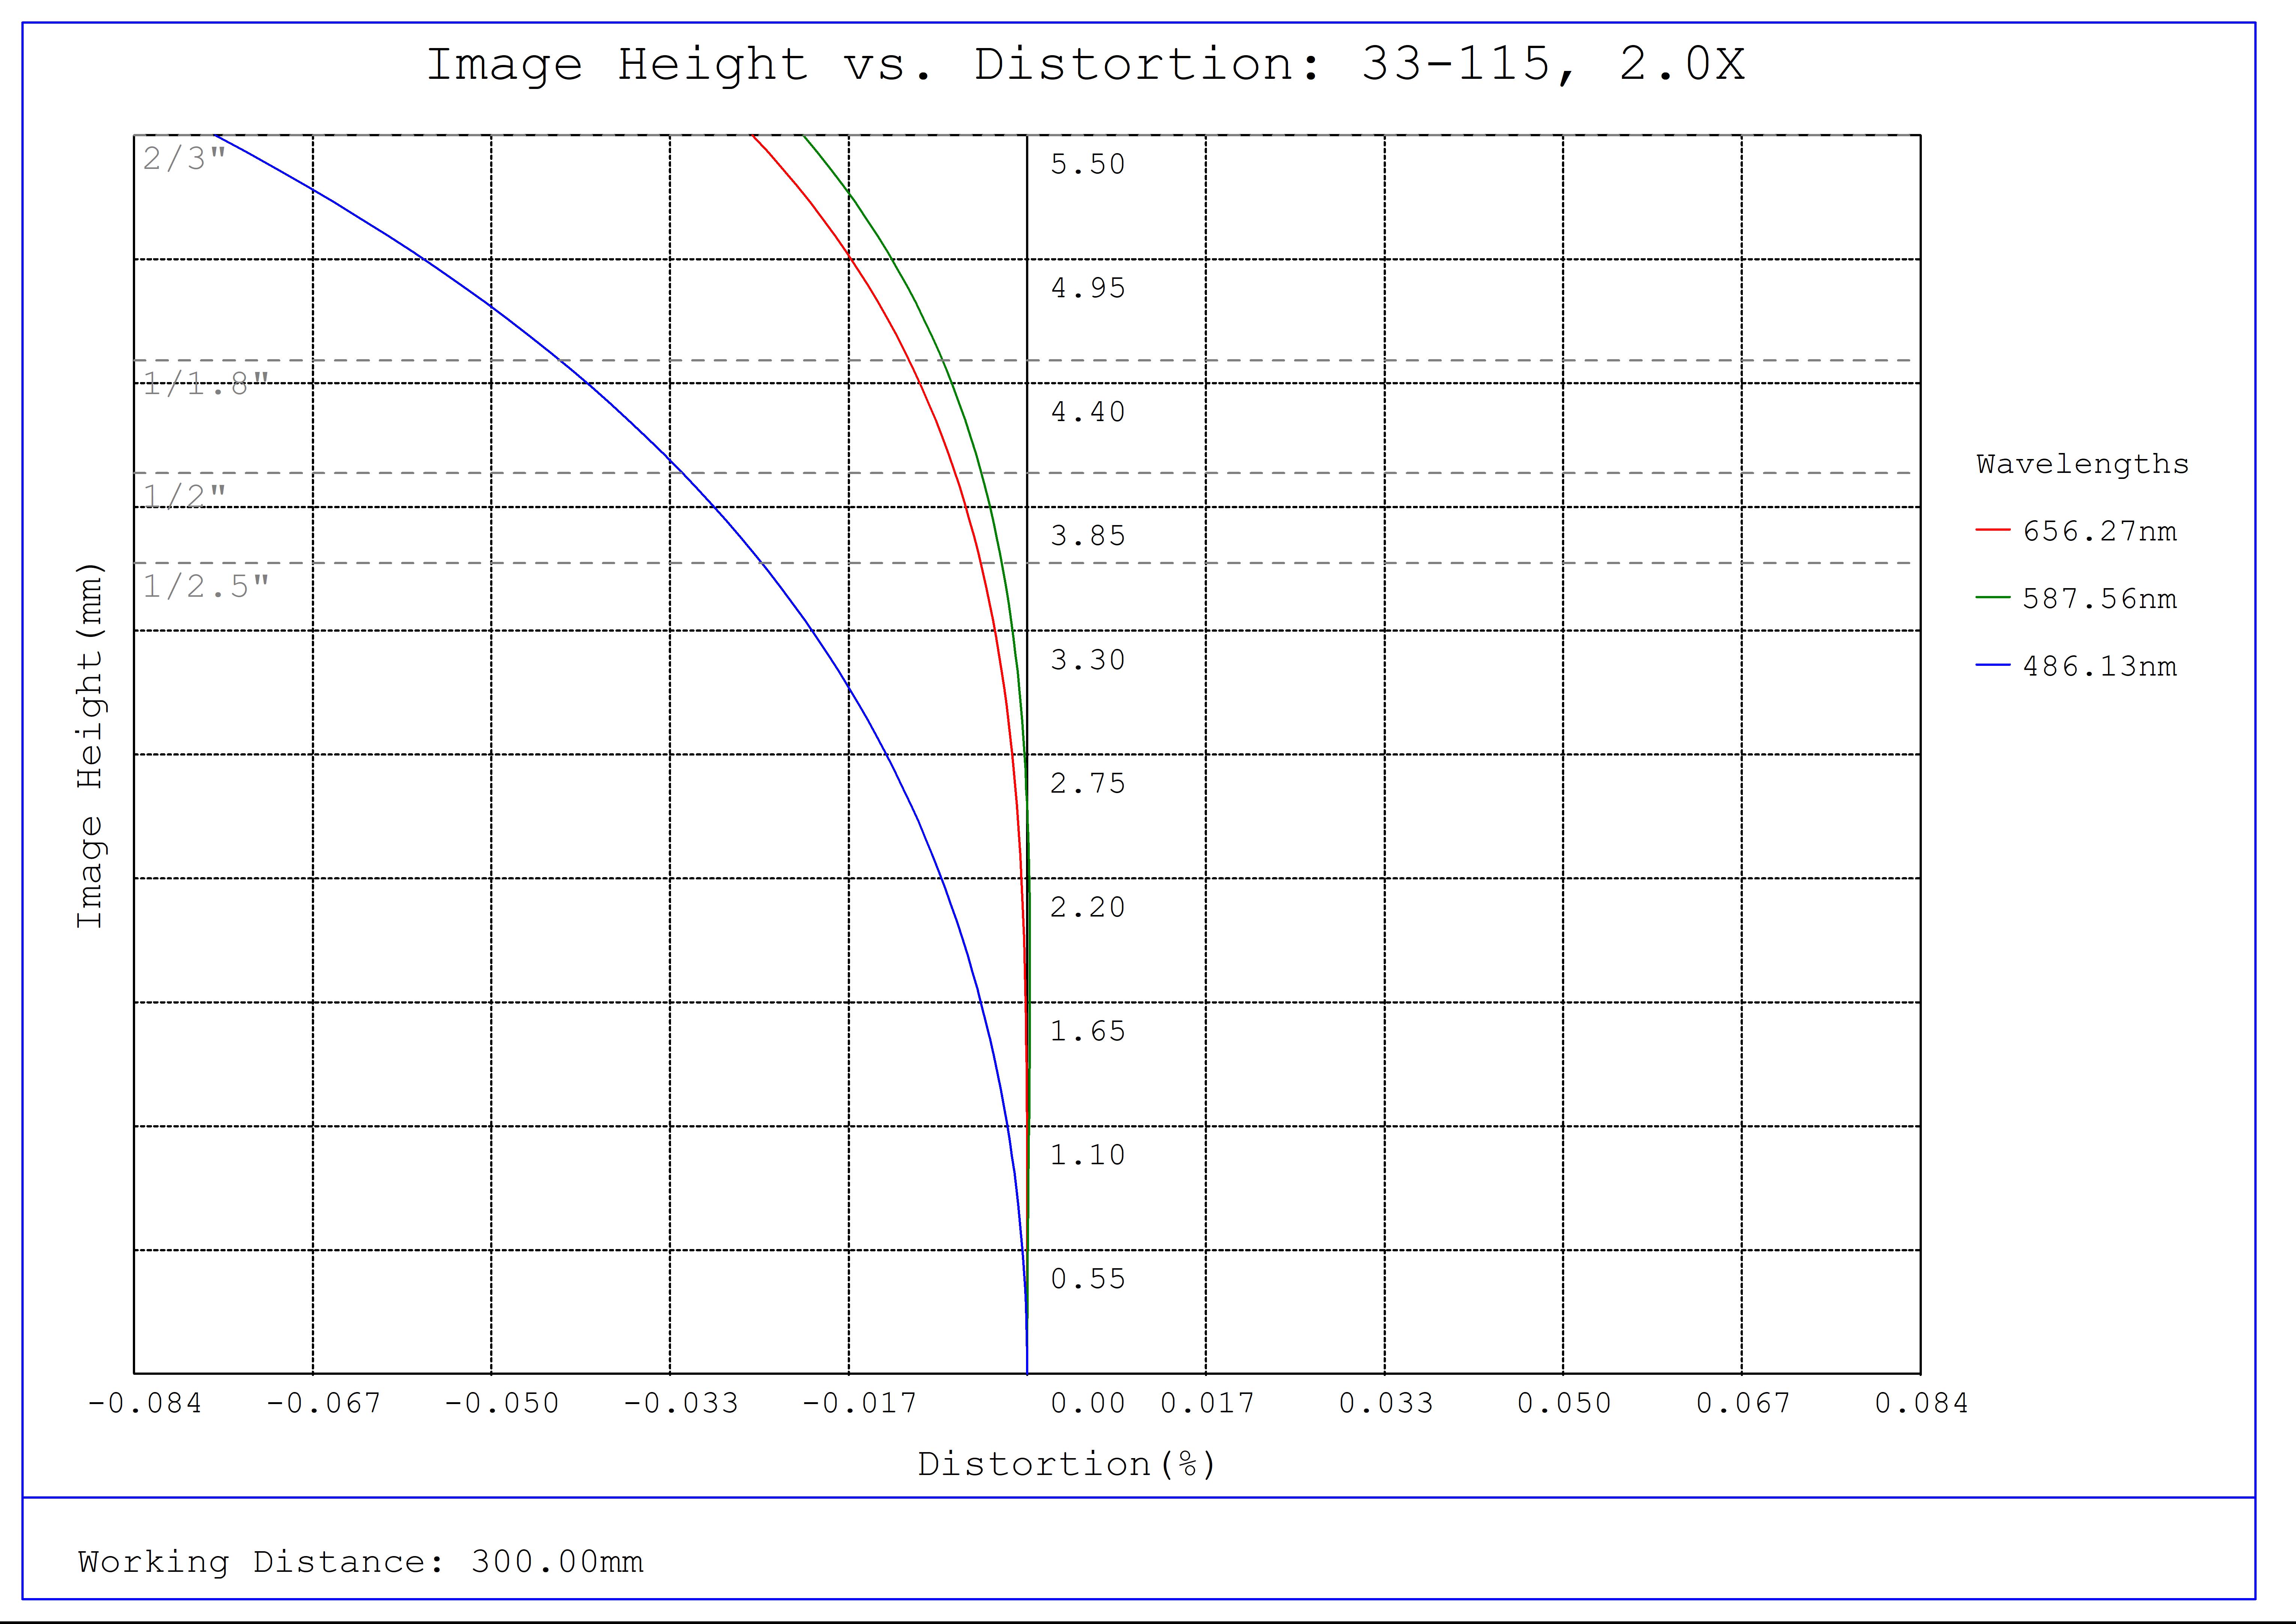 #33-115, 2X, 300mm WD, In-Line CompactTL™ Telecentric Lens, Distortion Plot